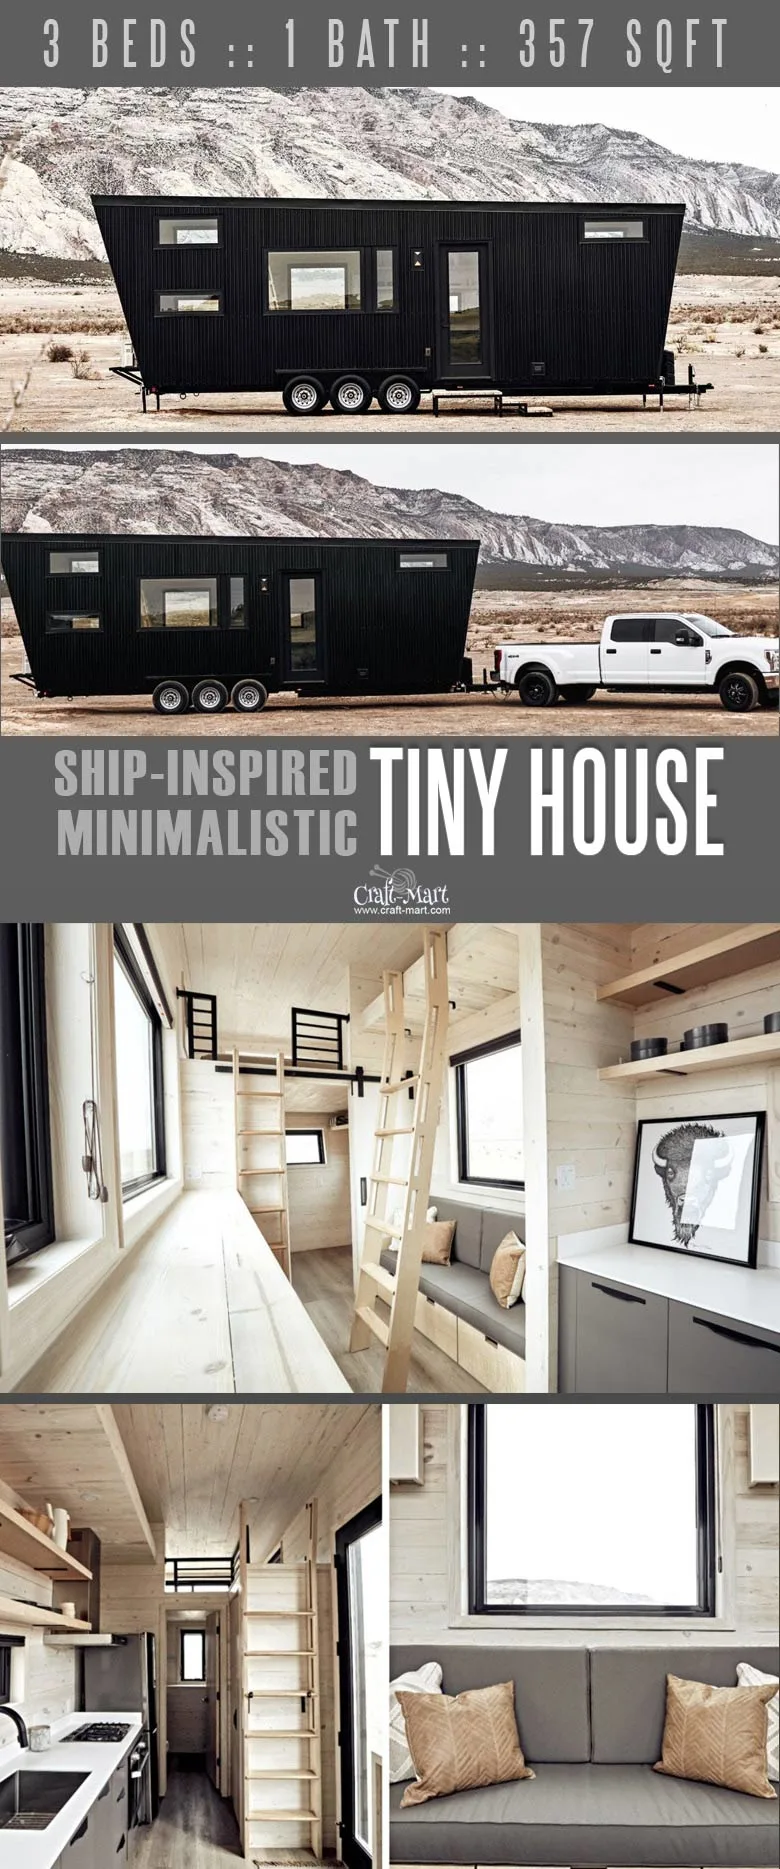 Minimalist tiny house that you may take anywhere. You can add custom features from most of the tiny home builders. Keep dreaming on or take an action and get one of these little affordable homes!#tinyhouseplans #tinyhome #tinyhouses #diywoodcrafts #diyproject #realestate #smallhouseplans